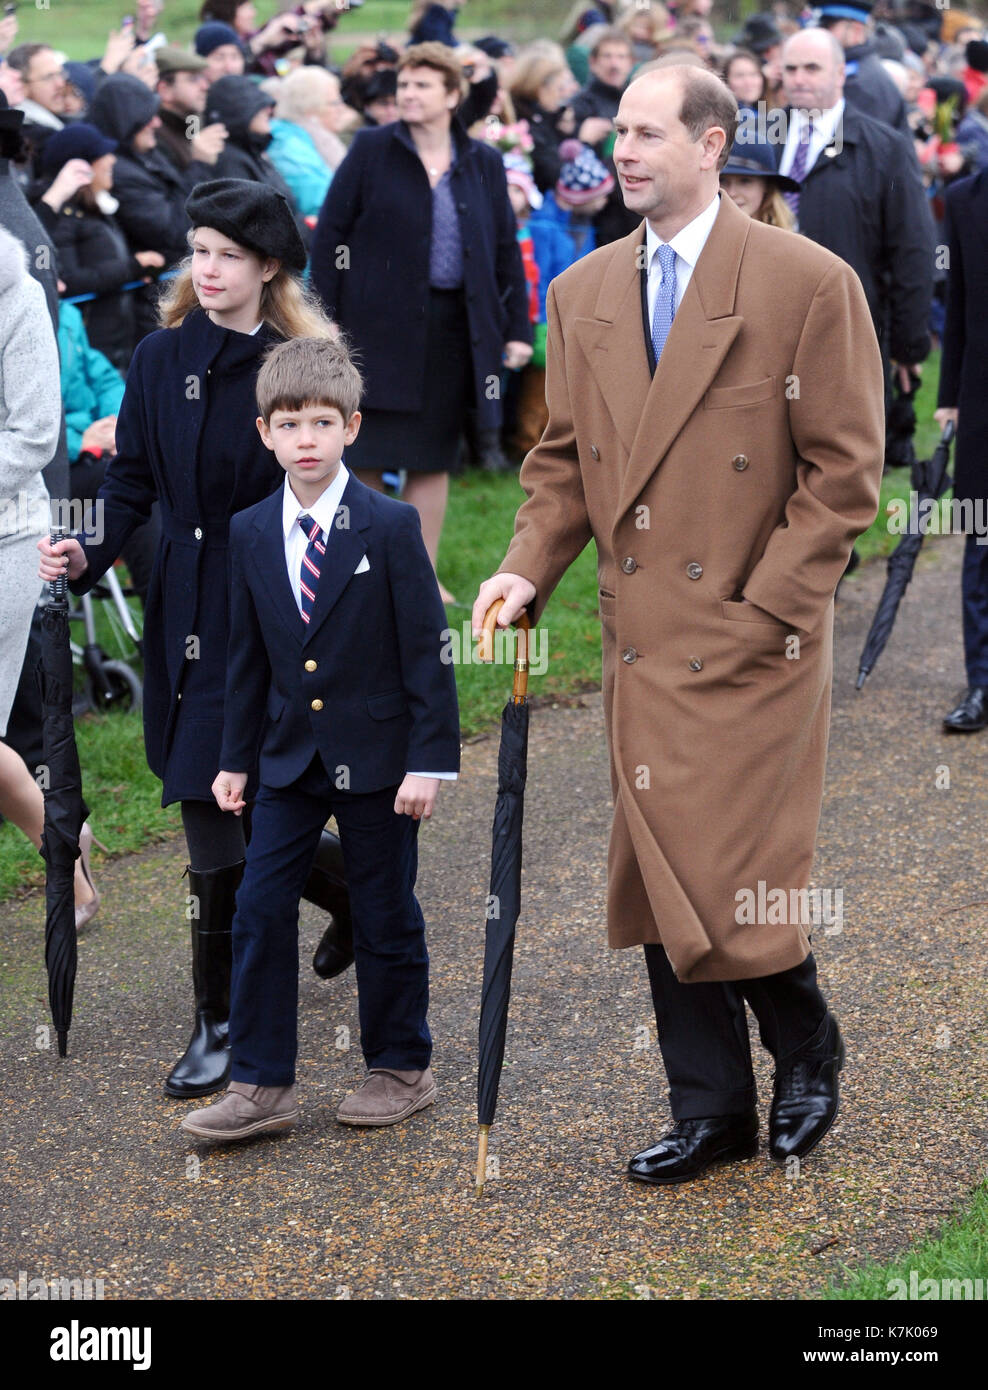 Photo Must Be Credited ©Kate Green/Alpha Press 079965 25/12/2015 Lady Louise Windsor, Viscount Severn James Alexander Philip Theo Mountbatten Windsor and Prince Edward Earl of Wessex during Royal Family Christmas Day Church Service at Sandringham Church in Norfolk. Stock Photo